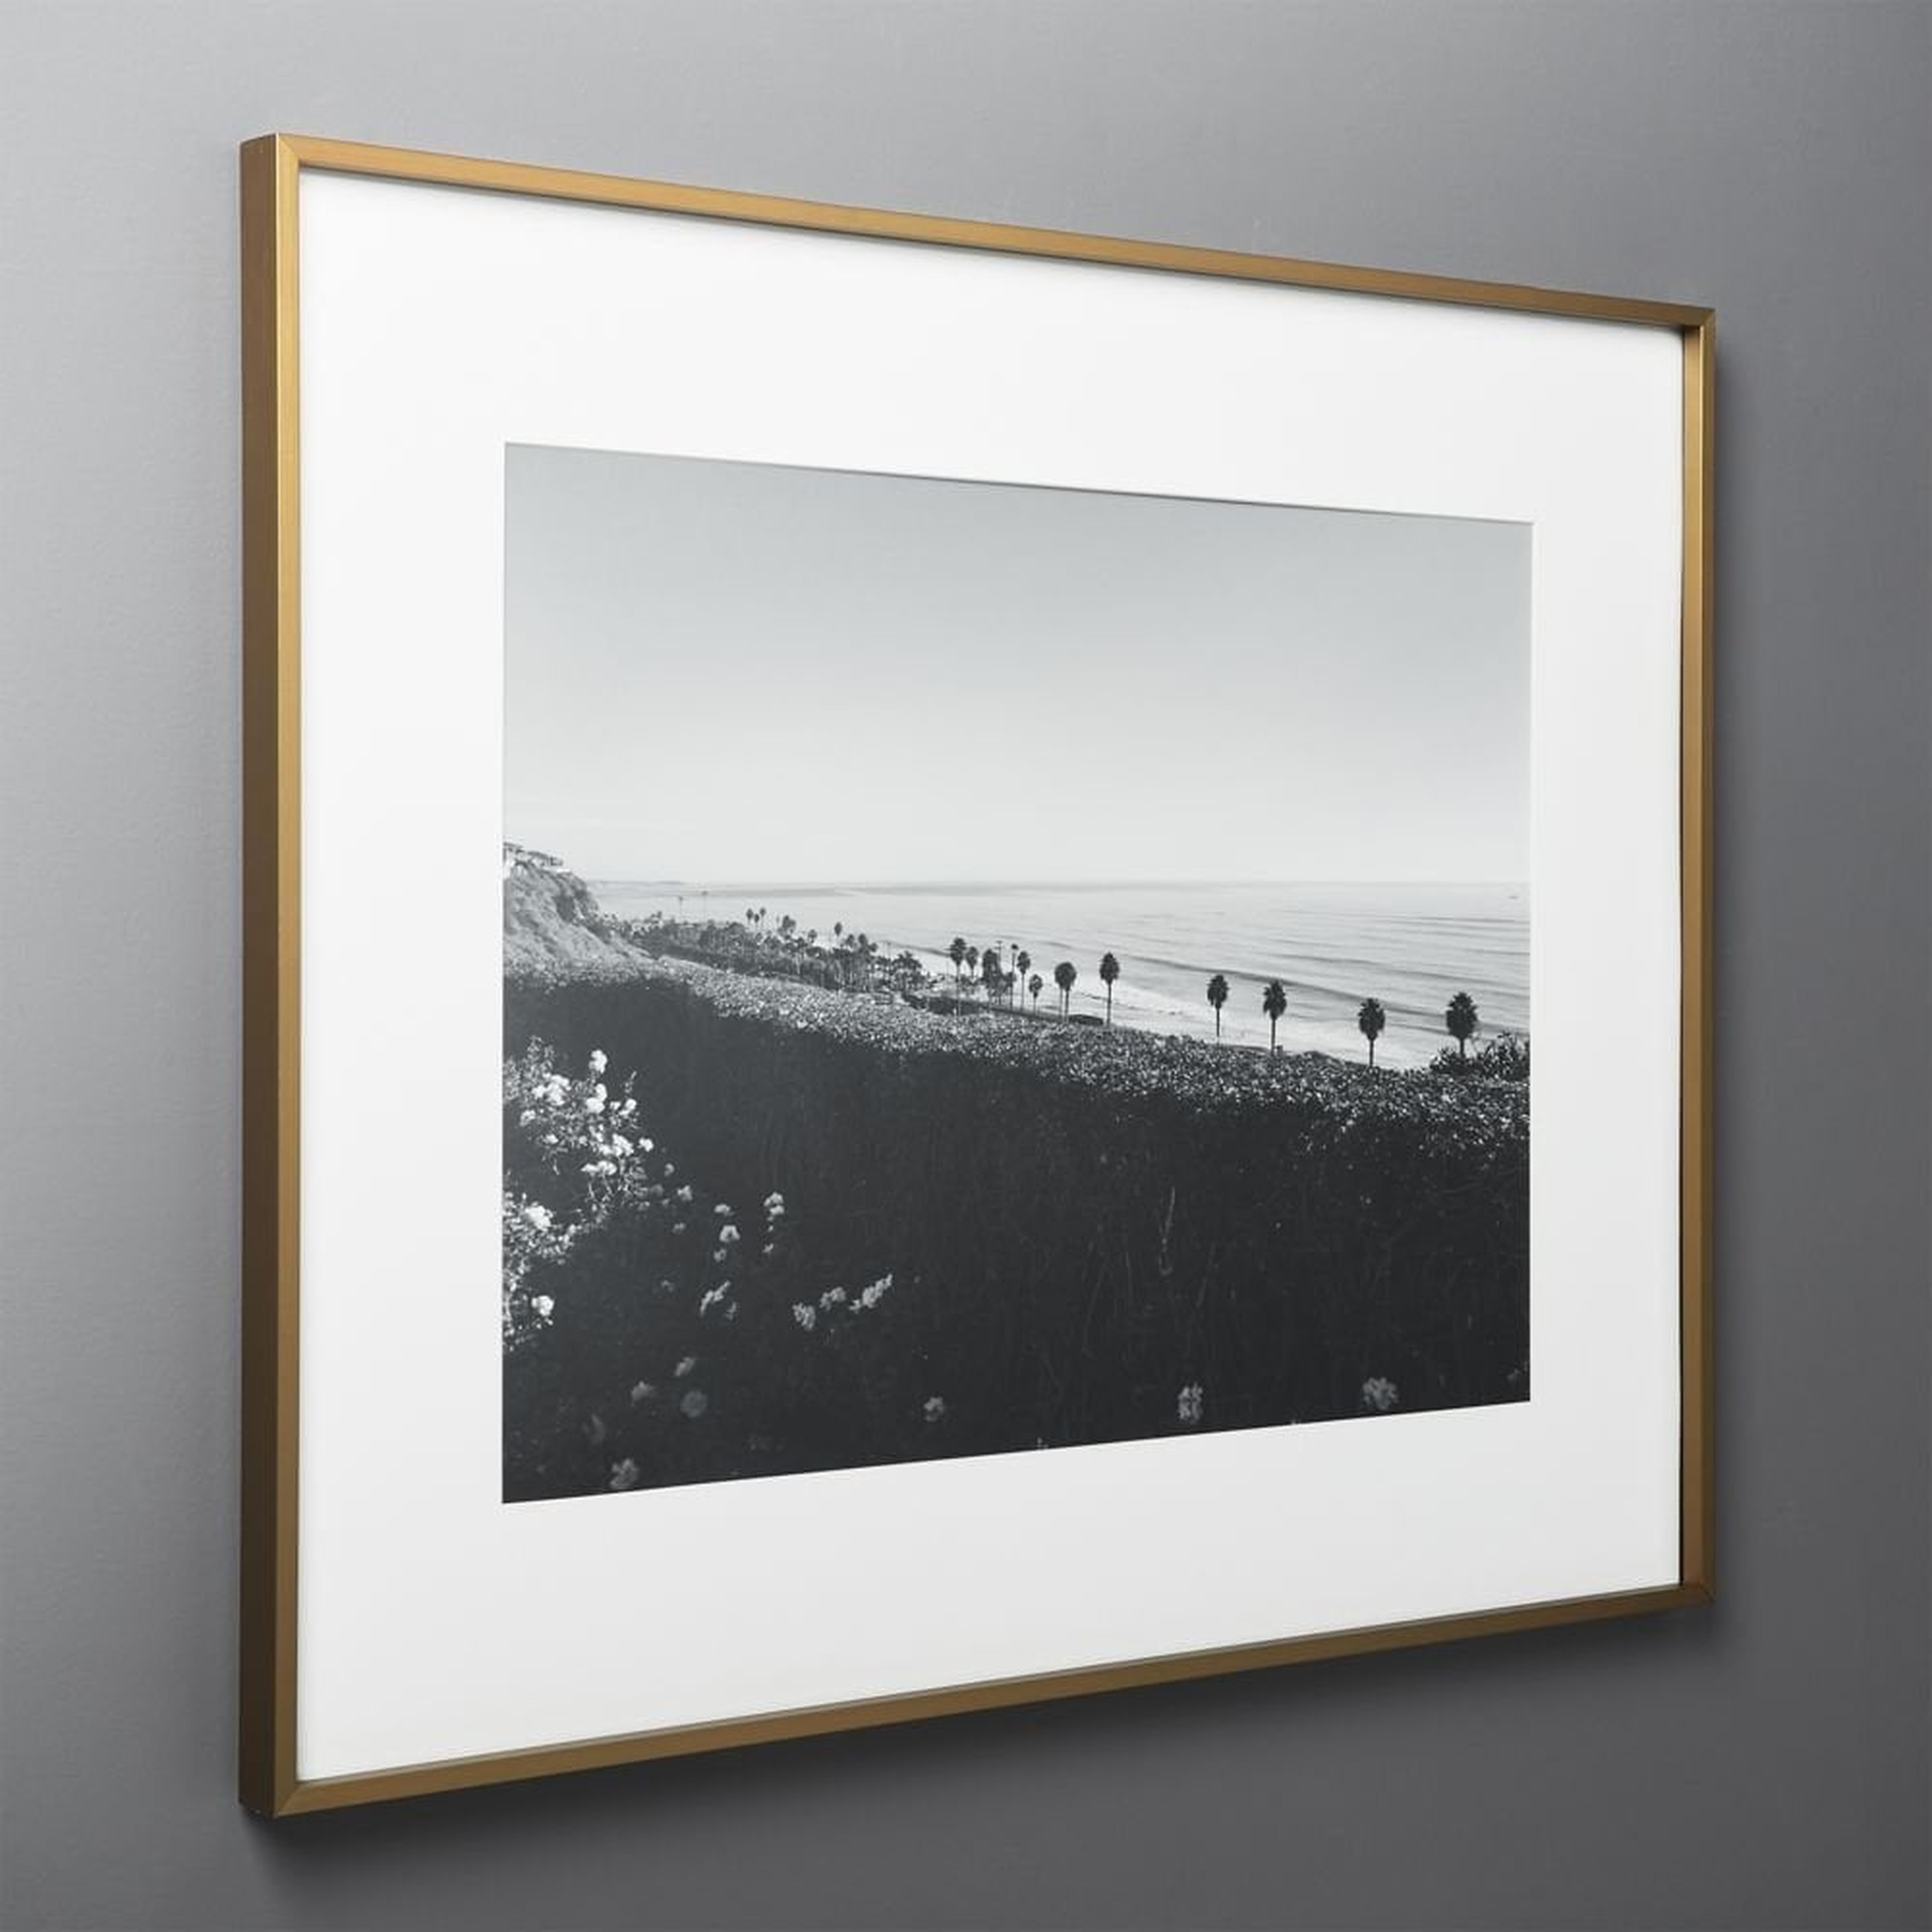 Gallery Brass Frame with White Mat 18x24 - CB2